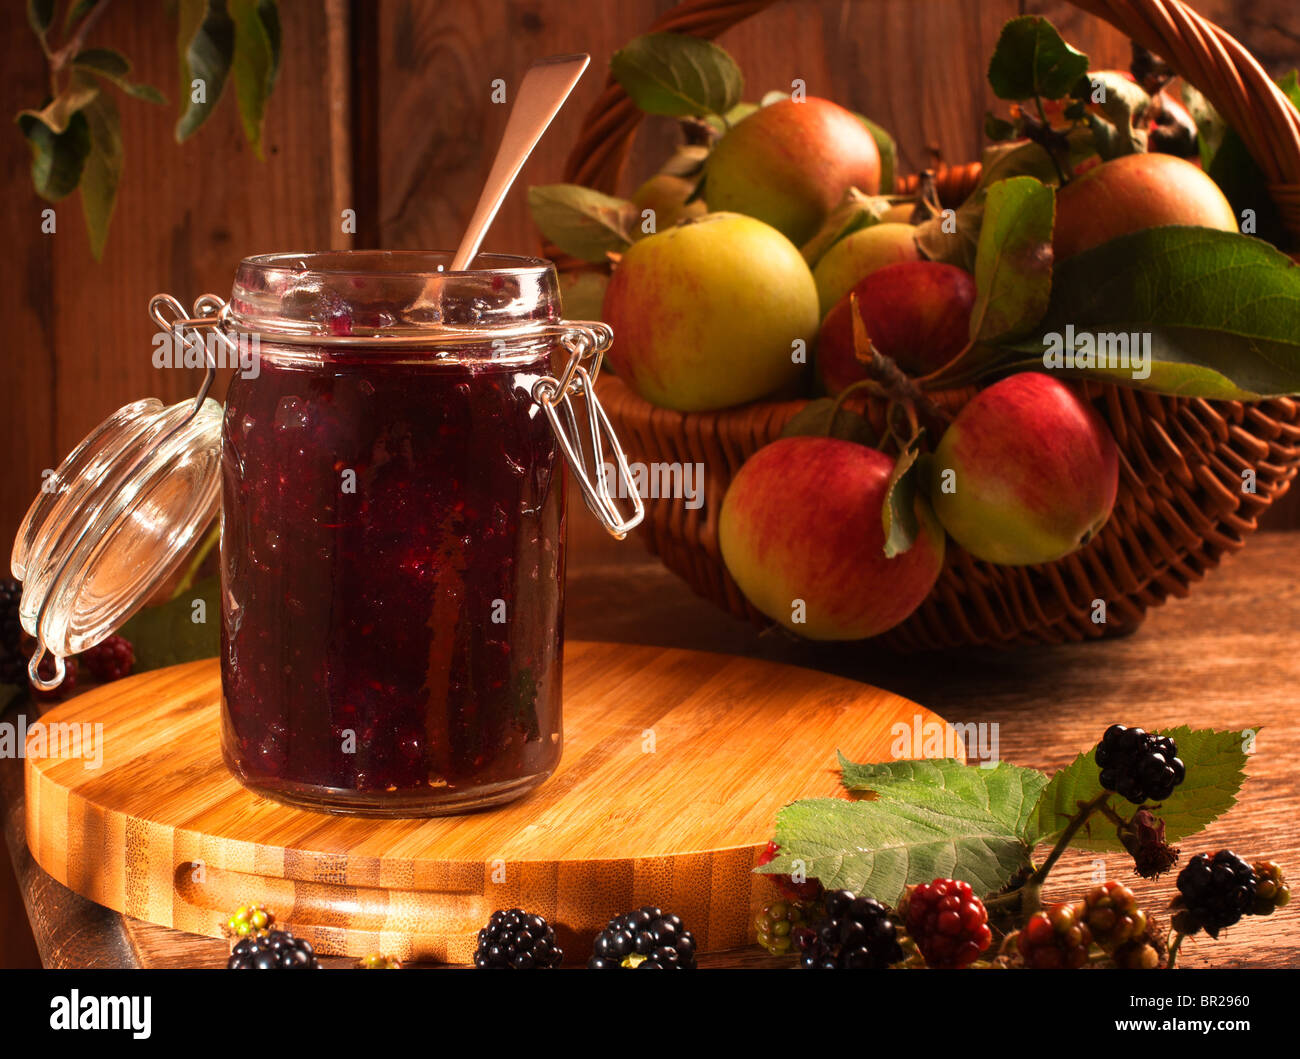 Blackberry & apple preserve in rustic country cottage setting Stock Photo